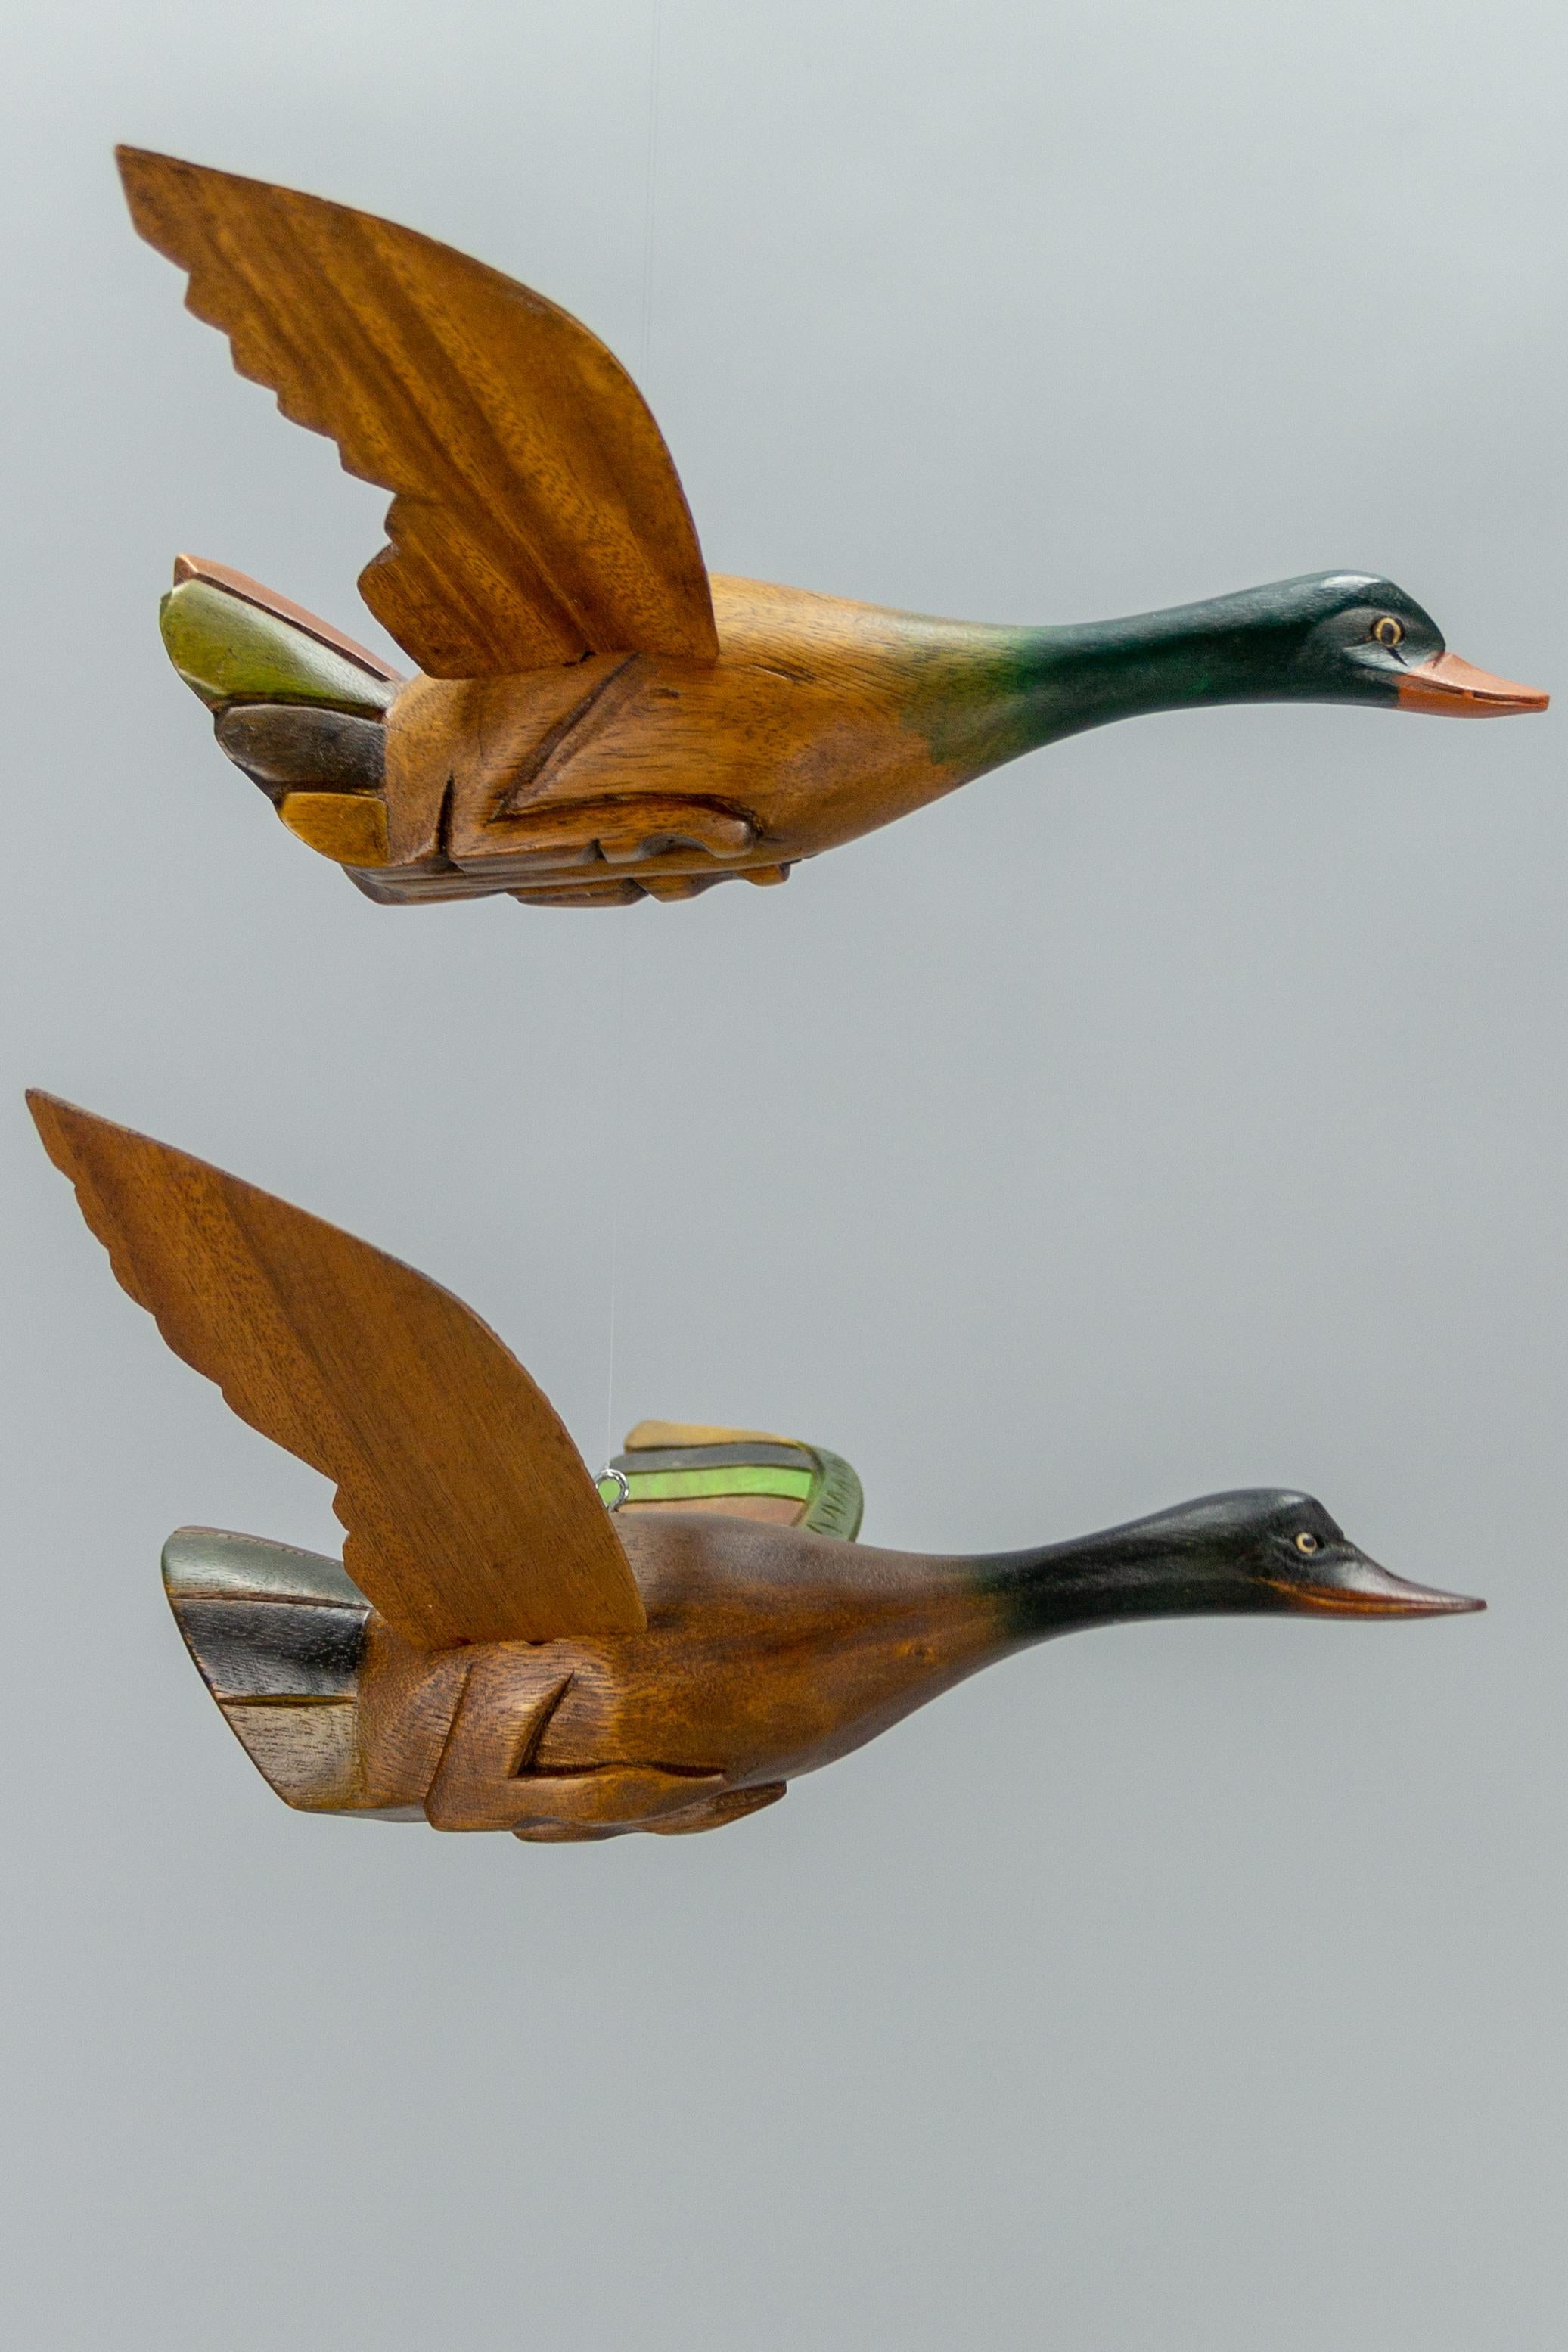 A set of two adorable carved walnut duck figures in flight painted in green, brown, and orange. The figurines are not identical, but very similar. The wings are removable. These beautiful bird sculptures can be hung and used as a nice decorative